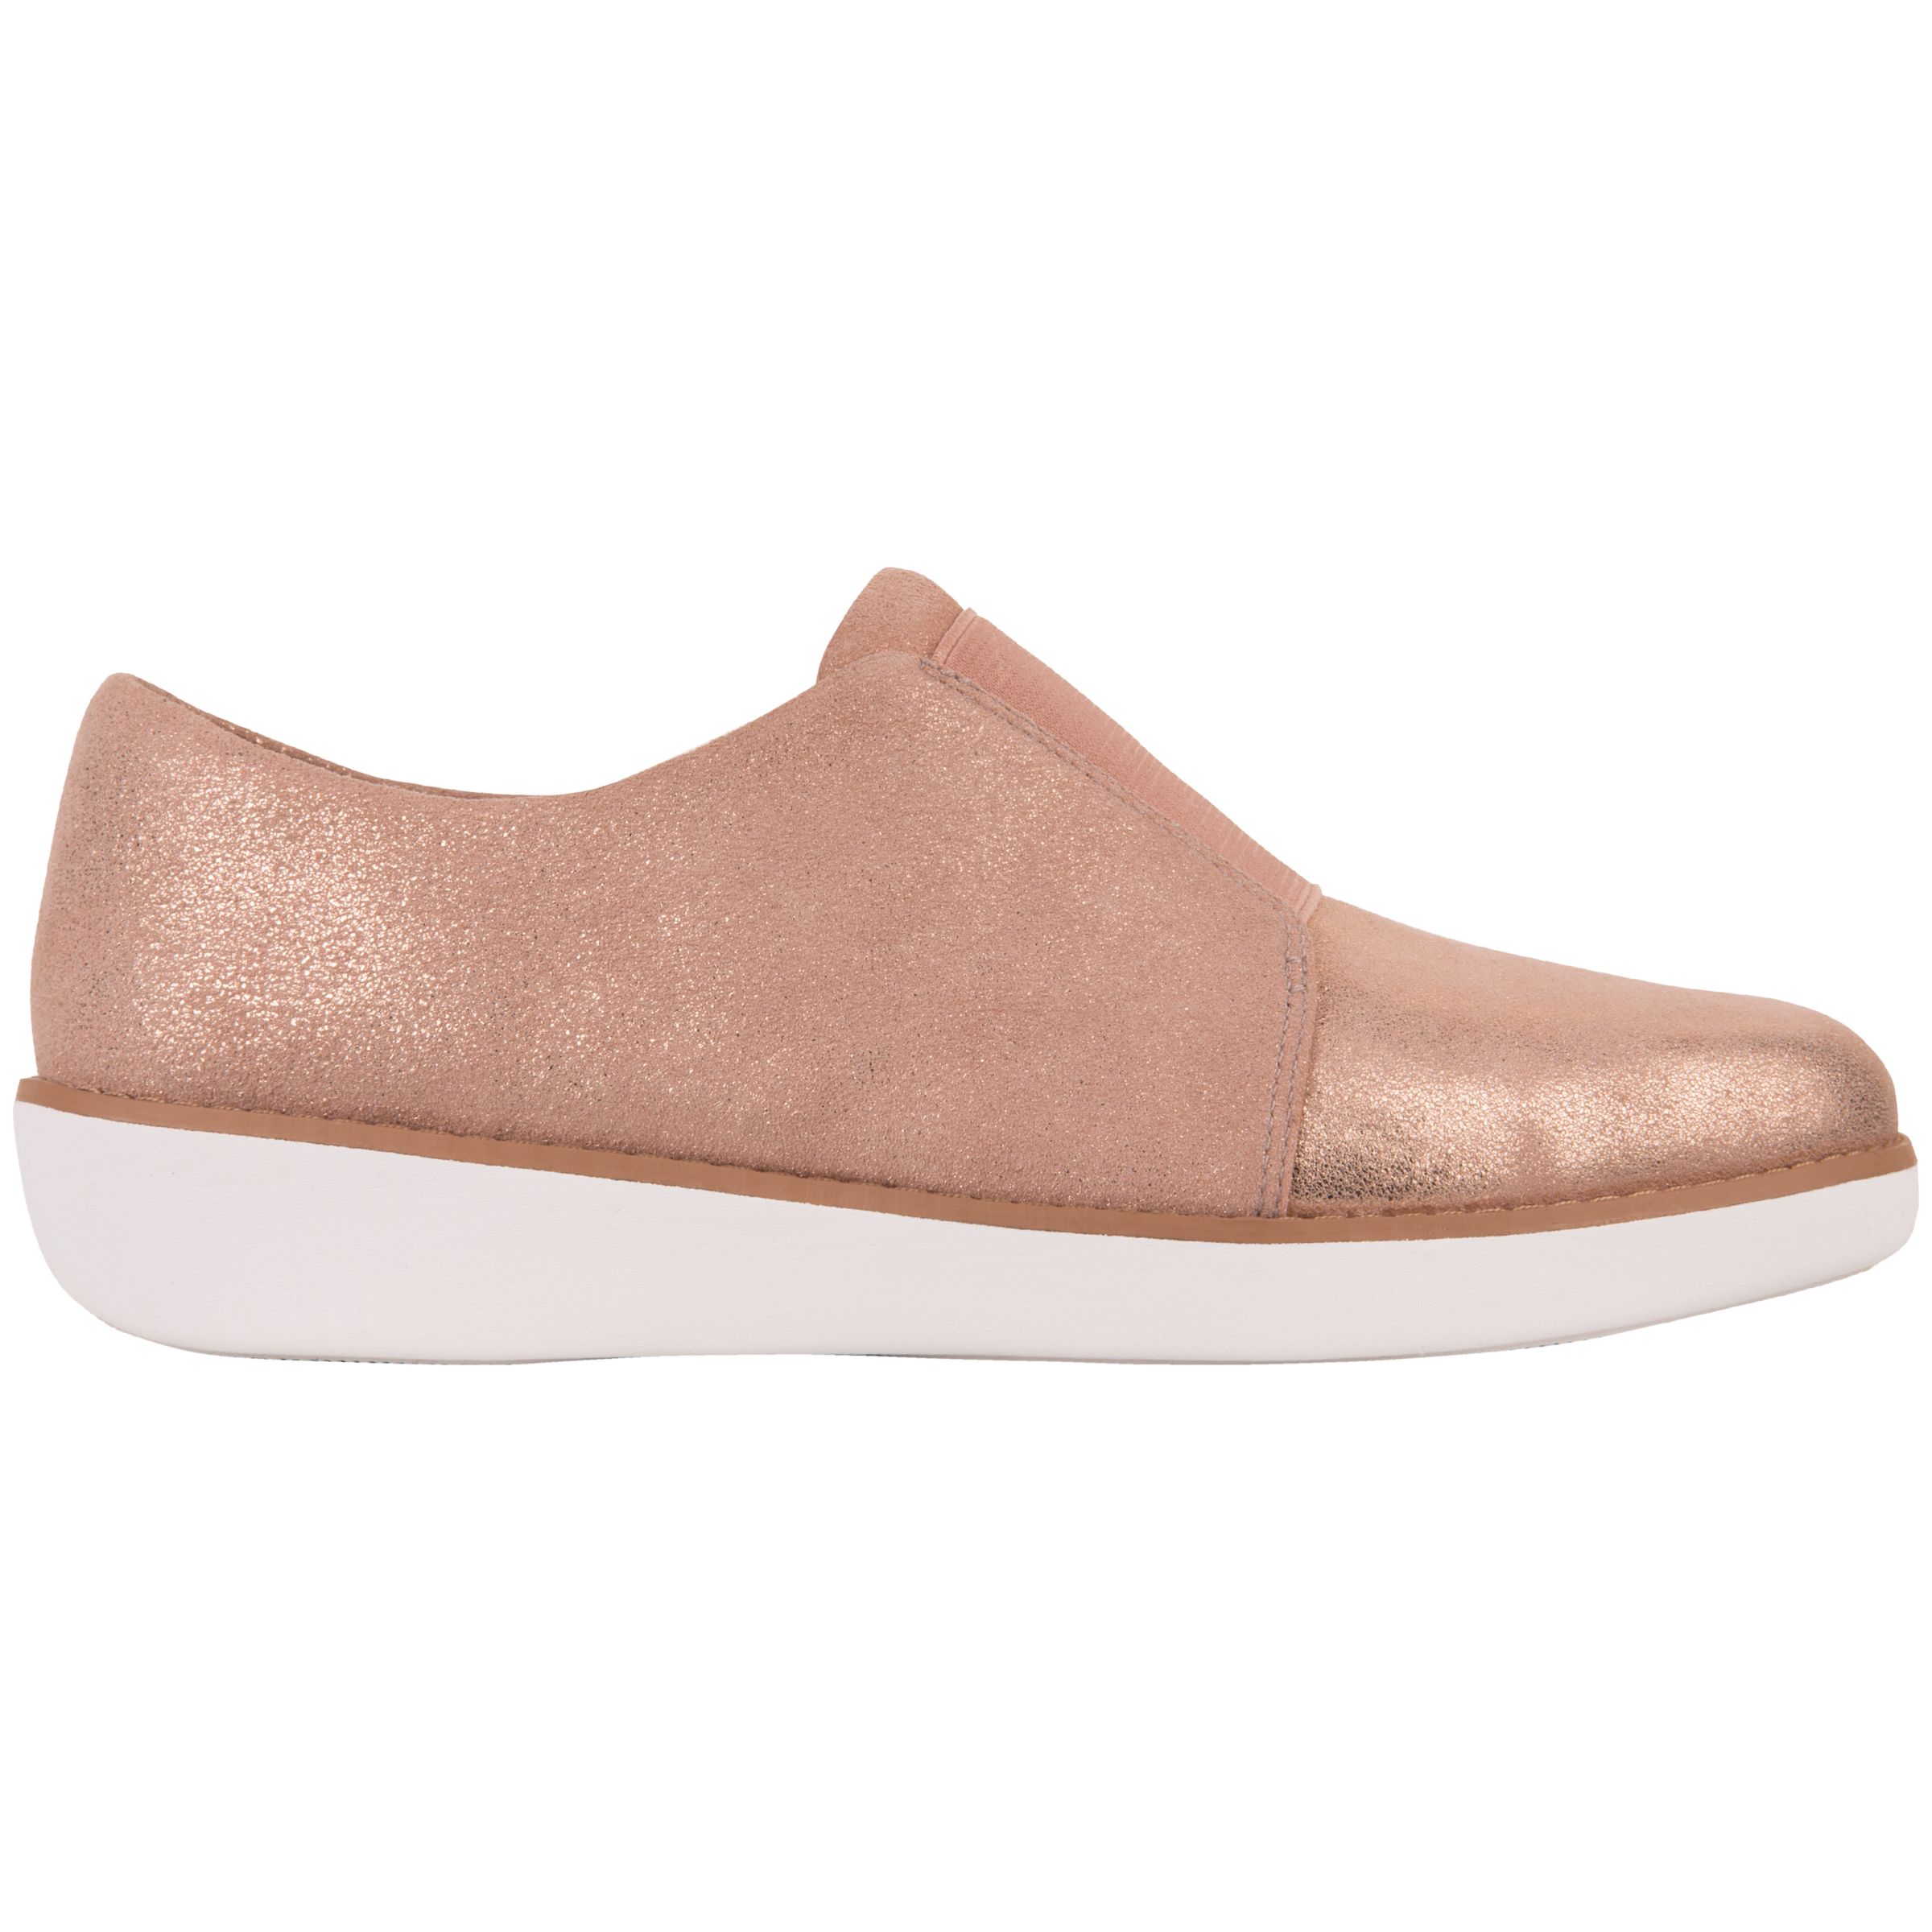 Fitflop Derby Laceless Slip On Shoes, Apple Blossom Leather